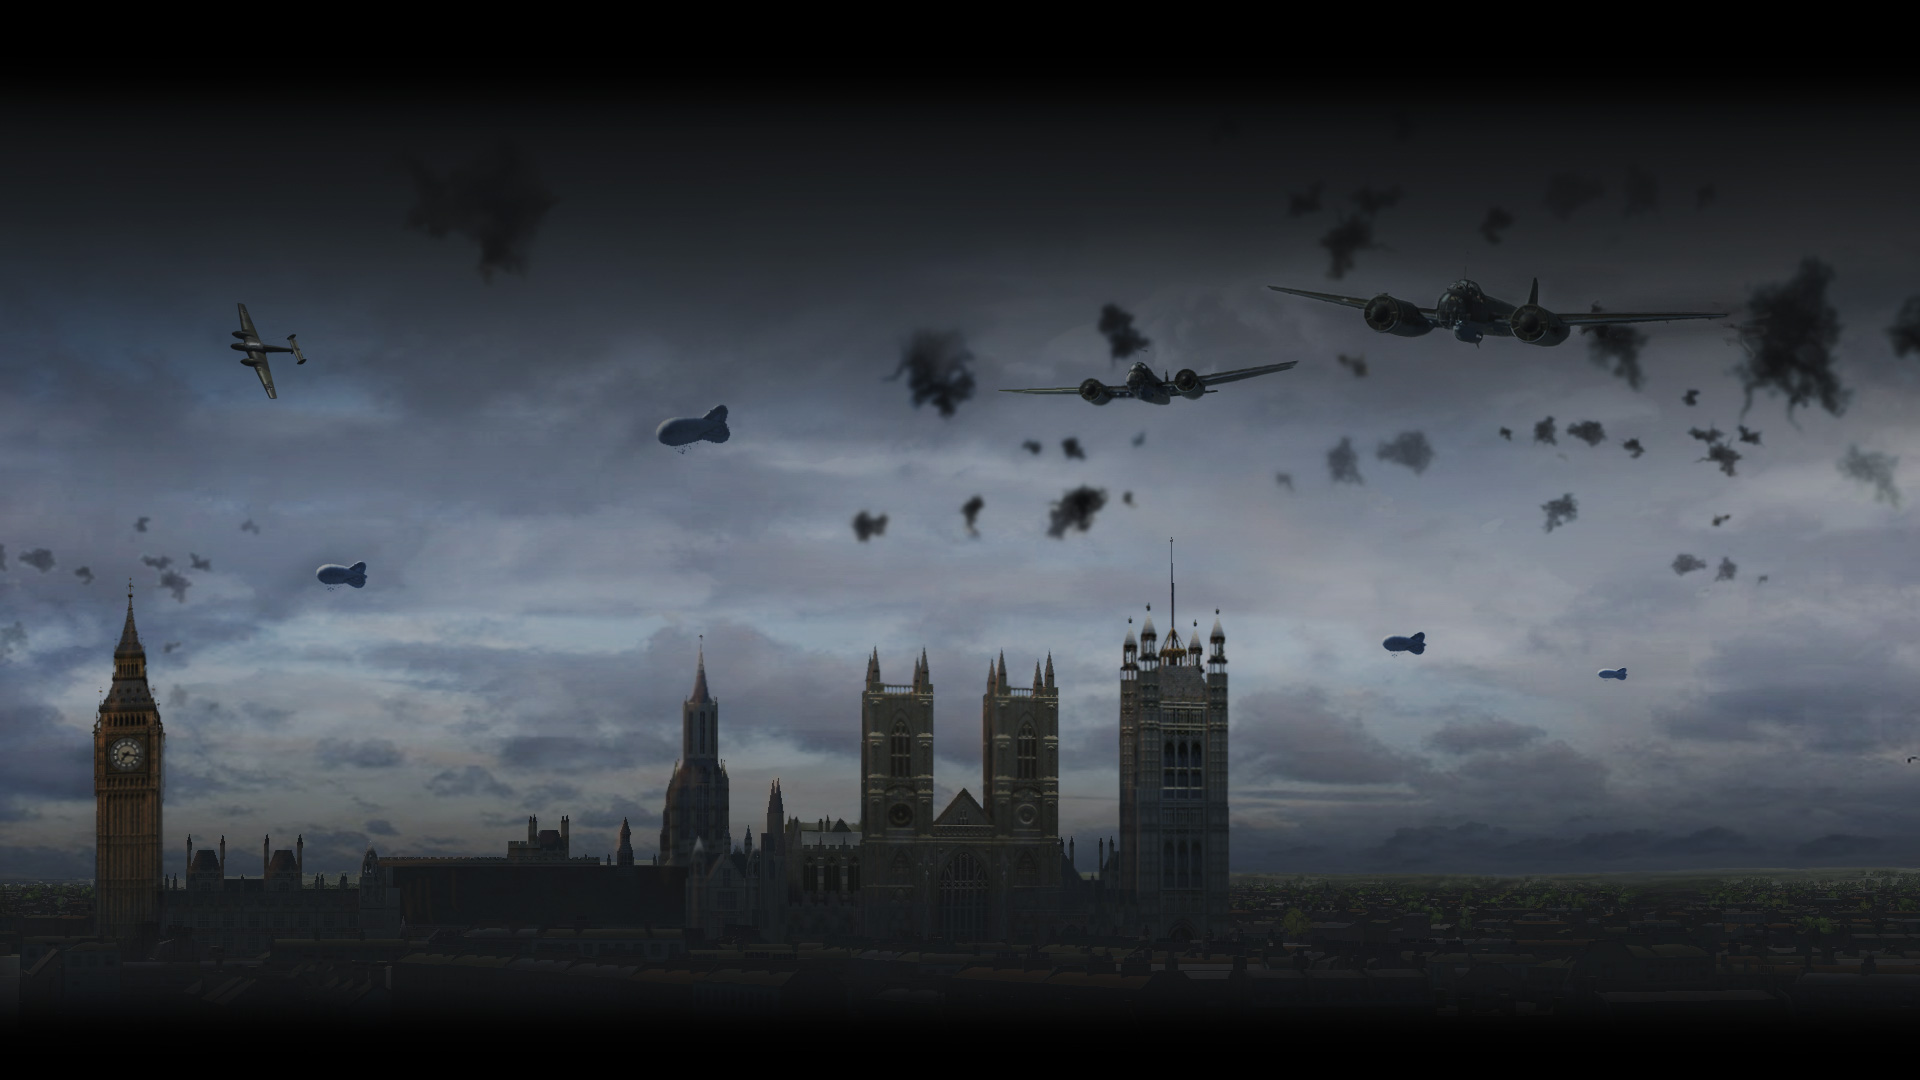 architecture, Building, London, Big Ben, UK, Video games, Aircraft, Military aircraft, Battle, IL 2 Cliffs Of Dover, Clouds Wallpaper